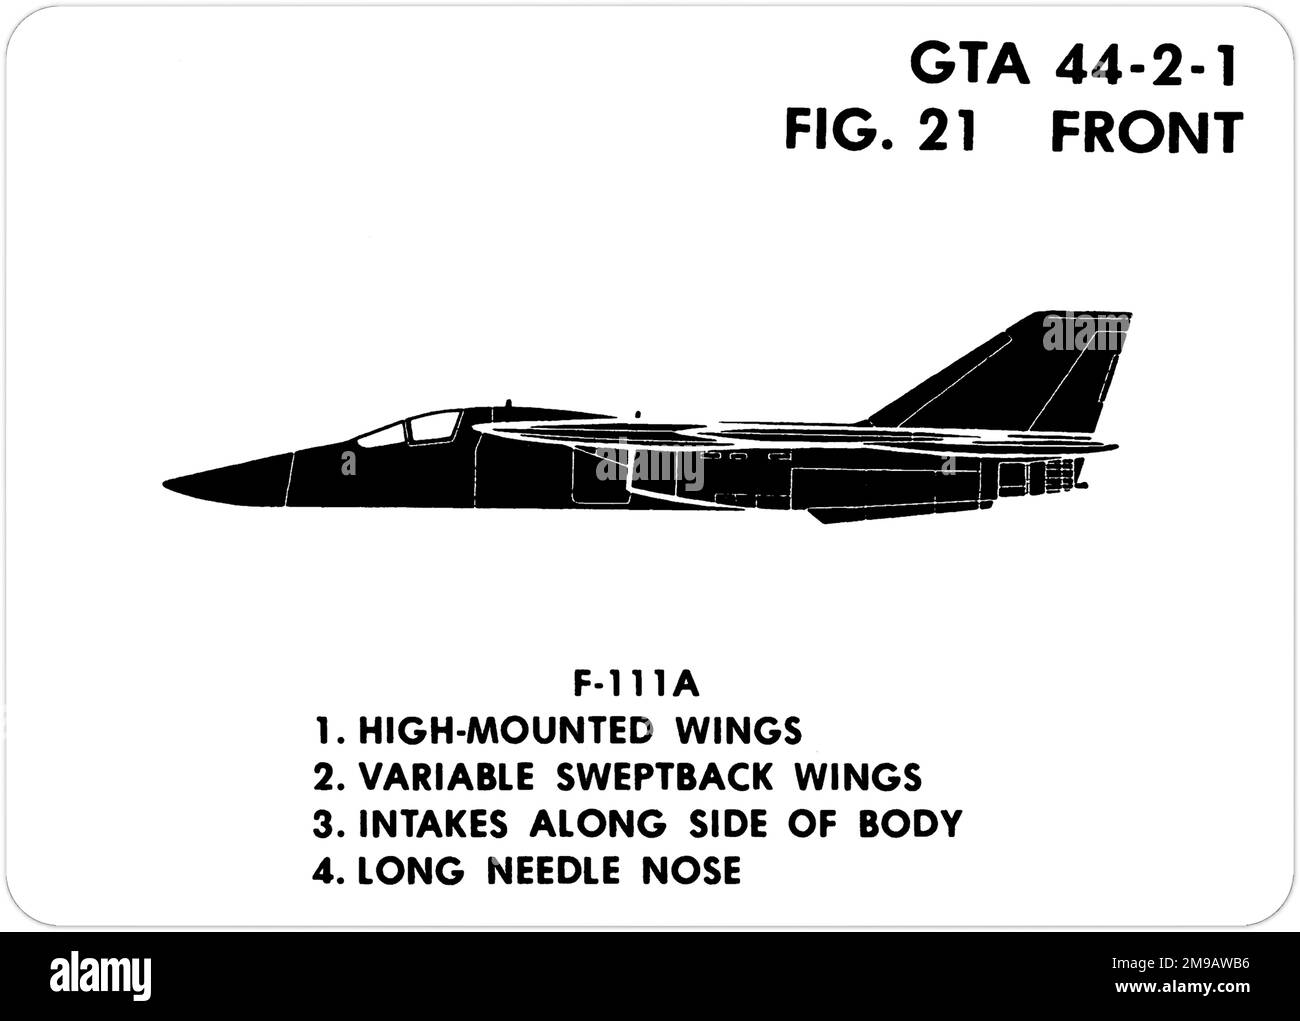 General Dynamics F-111A. This is one of the series of Graphics Training Aids (GTA) used by the United States Army to train their personnel to recognize friendly and hostile aircraft. This particular set, GTA 44-2-1, was issued in July1977. The set features aircraft from: Canada, Italy, United Kingdom, United States, and the USSR. Stock Photo